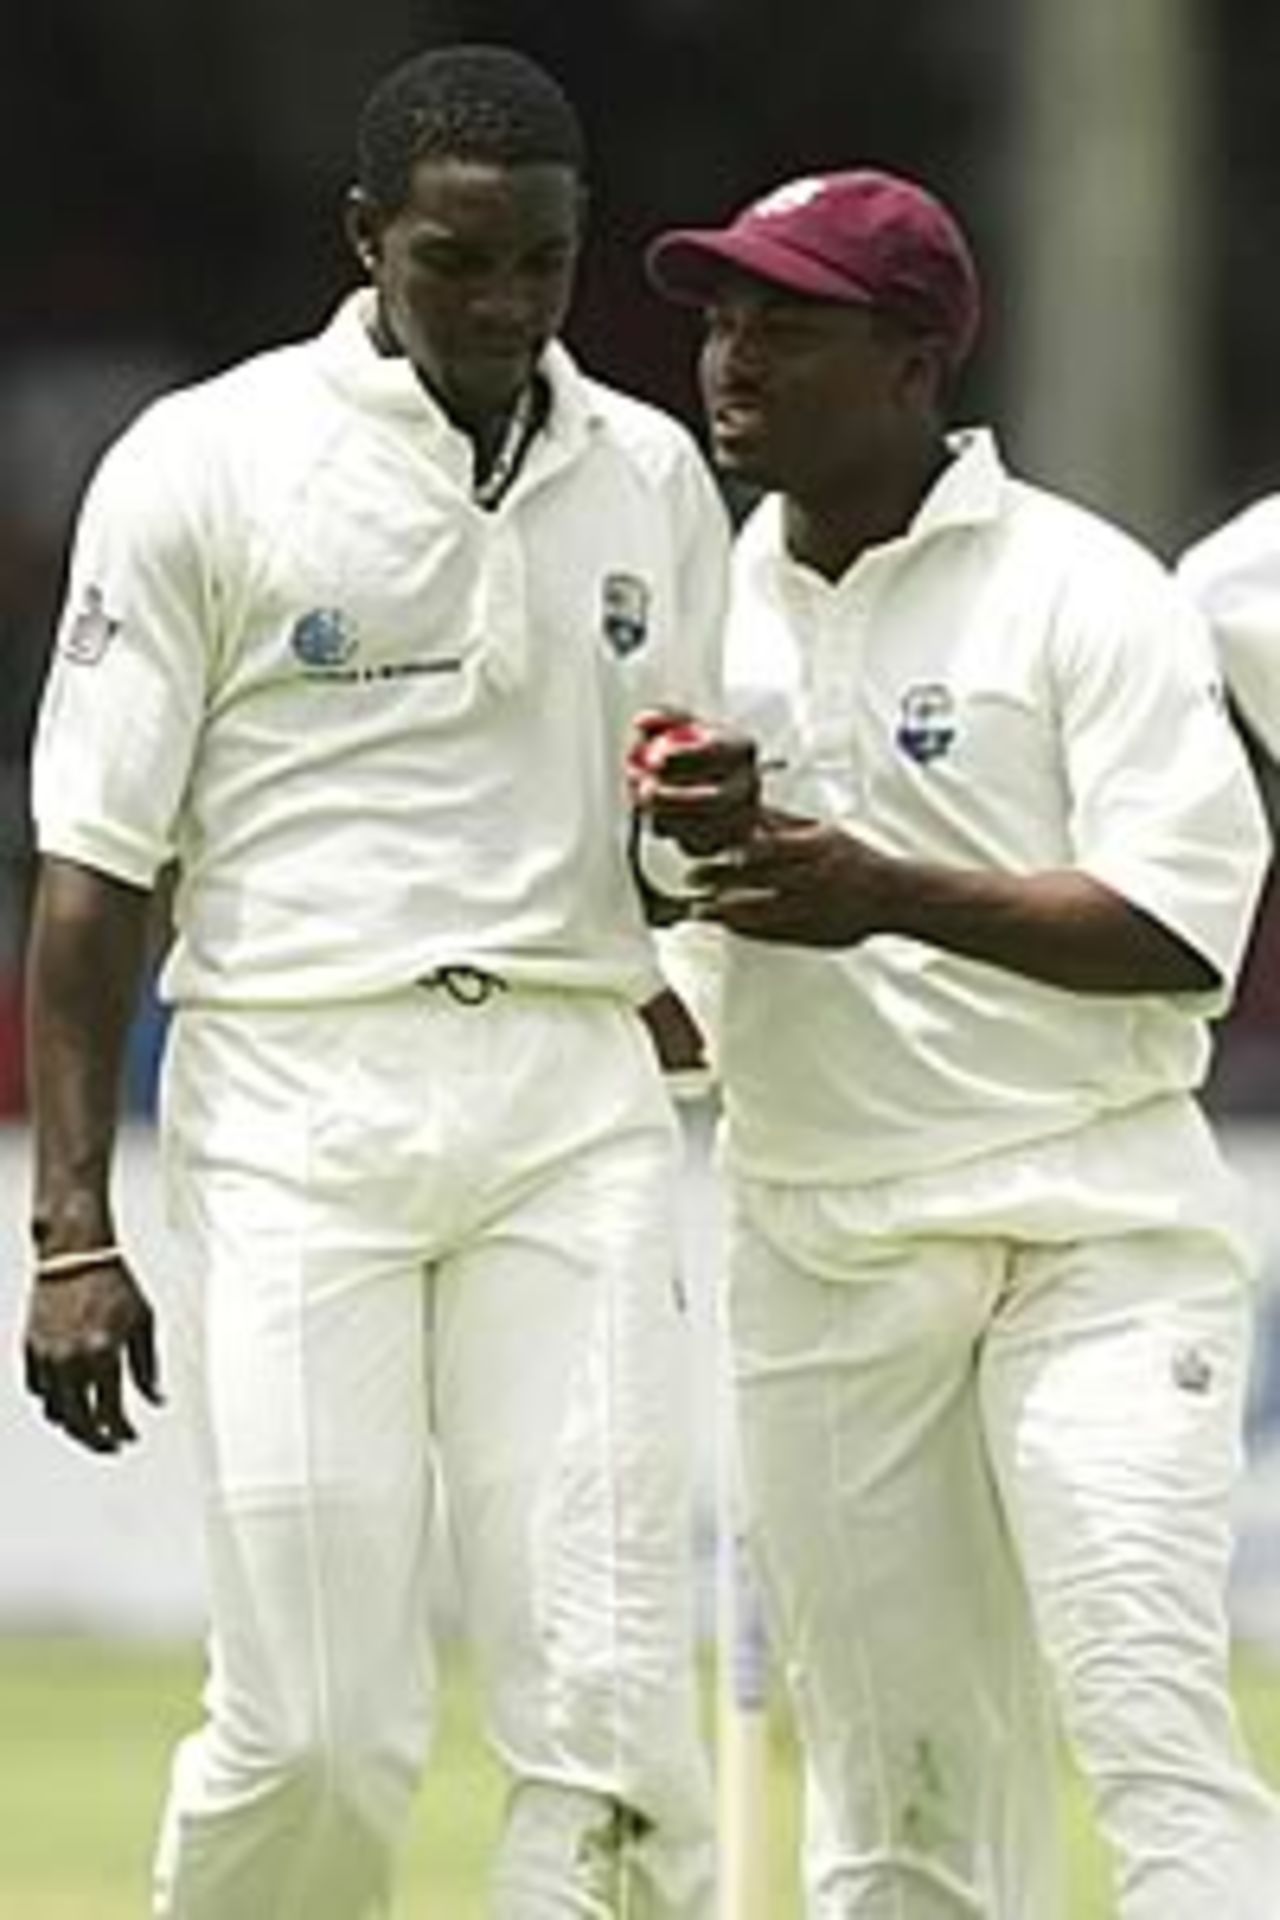 BRIDGETOWN, BARBADOS - MAY 1: Captain Brian Lara of the West Indies encourages his bowler Jermaine Lawson during day one of the Third Test between the West Indies and Australia on May1, 2003 at Kensington Oval in Bridgetown, Barbados.